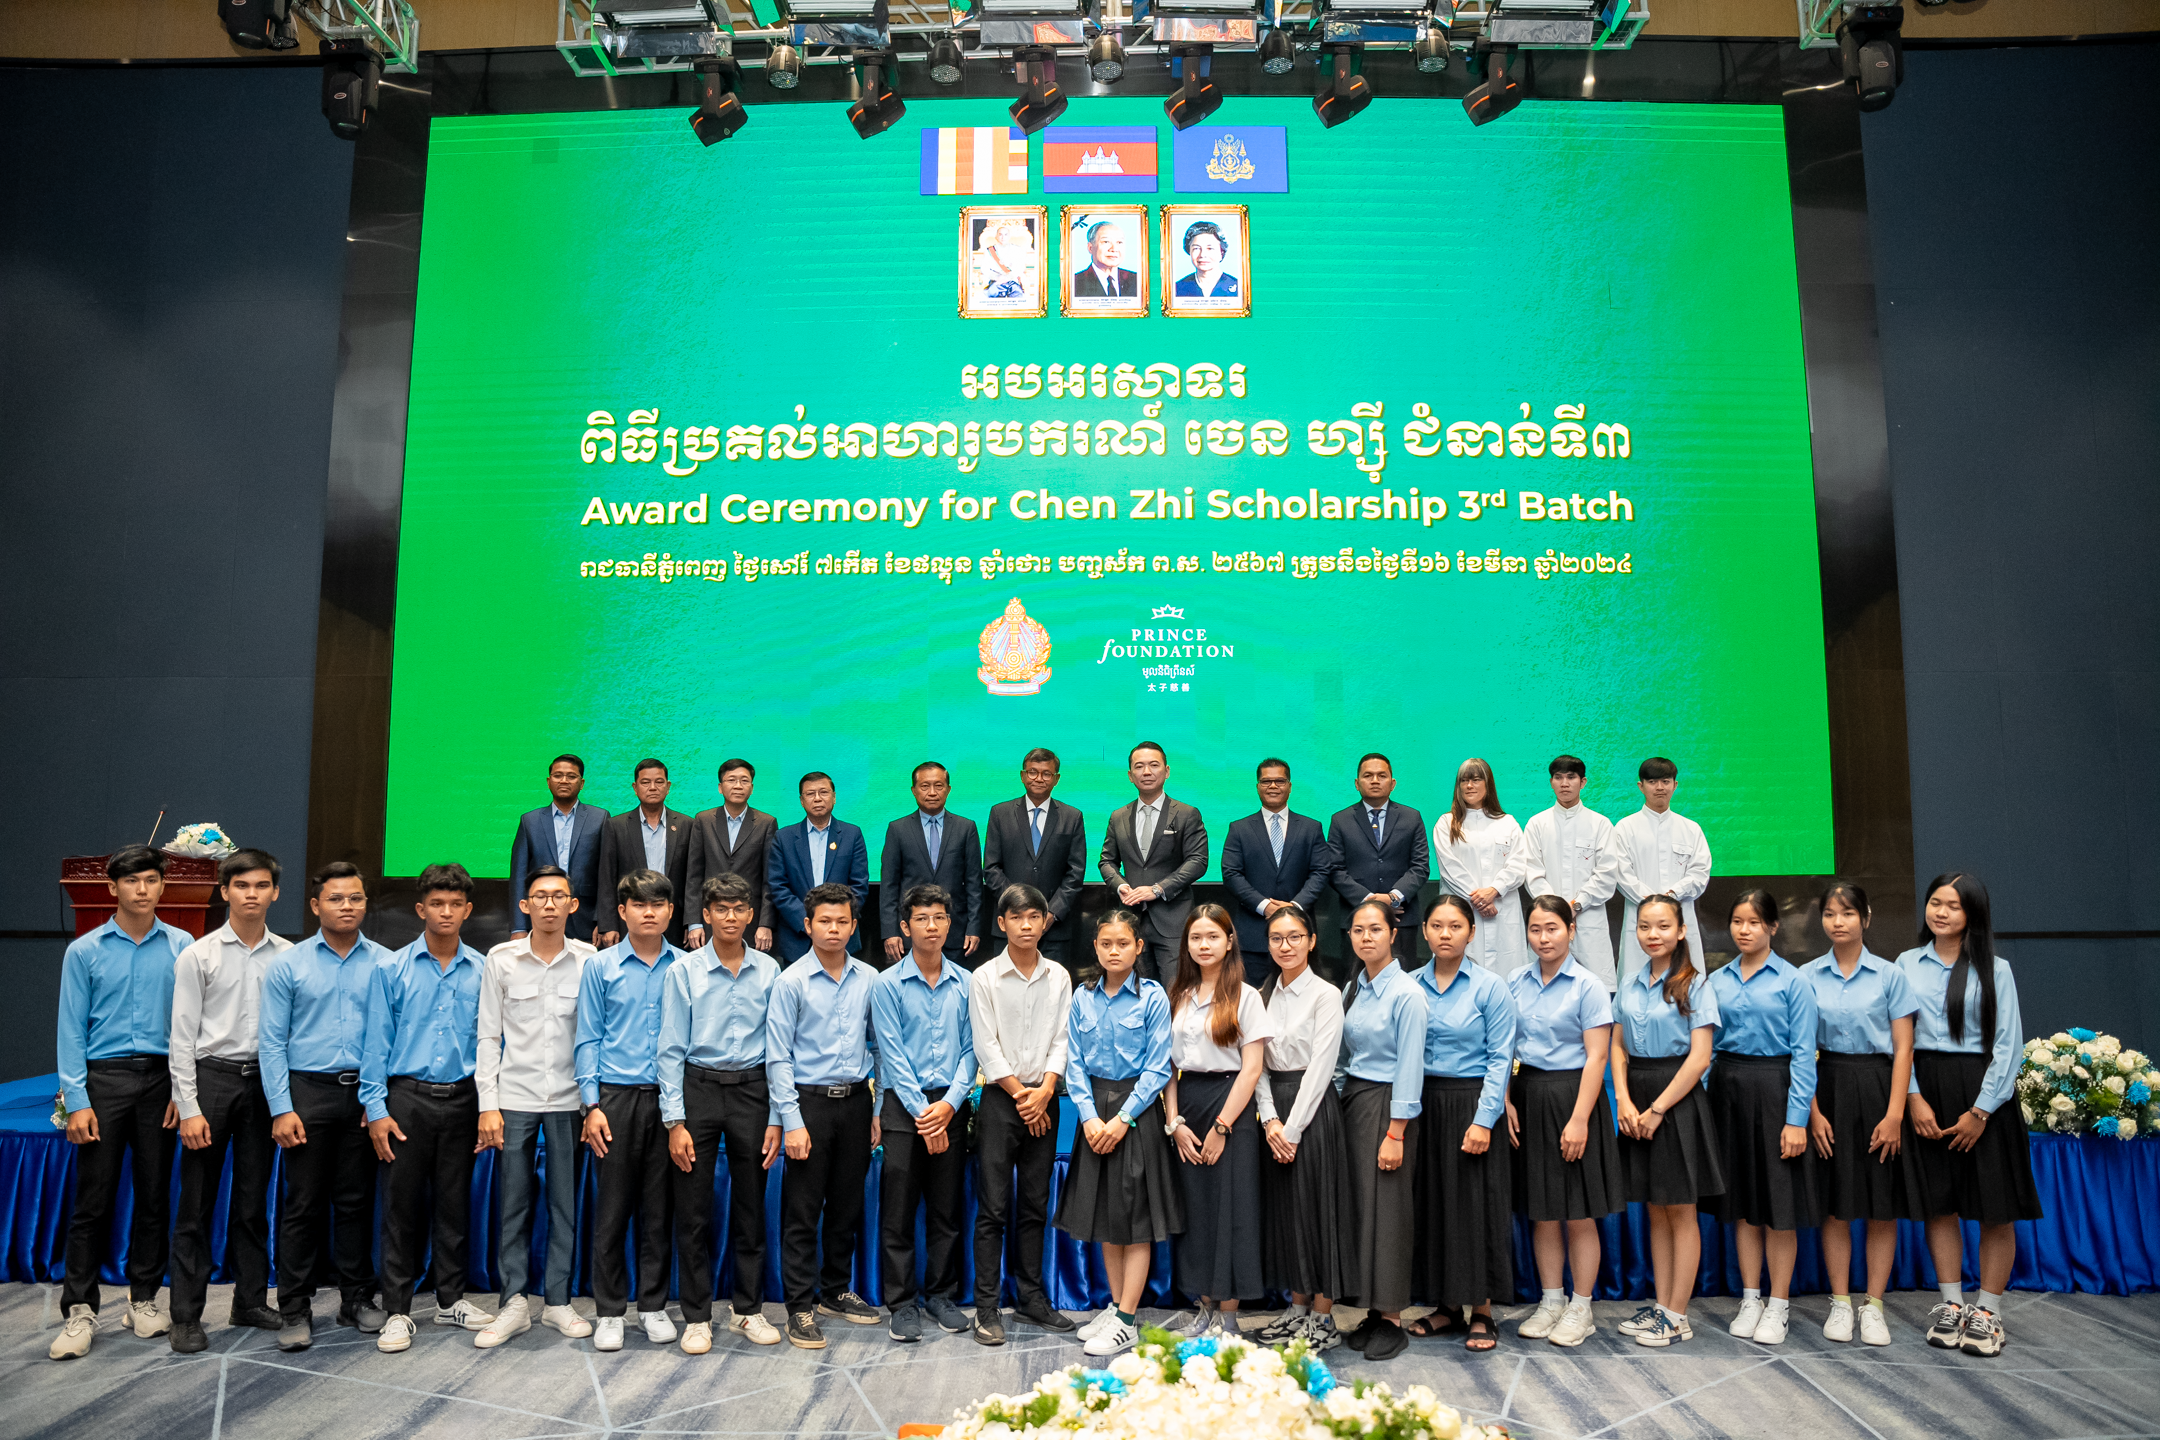 His Excellency Dr. Hang Chuon Naron, Deputy Prime Minister and Minister of Education, Youth and Sport (6th from left), was the guest of honor at the recent award ceremony of the third batch of the Chen Zhi Scholarship. Also in the photo is Mr. Gabriel Tan, Chief Communications Officer of Prince Holding Group (6th from right), alongside other government and university representatives, as well as several of the scholars.